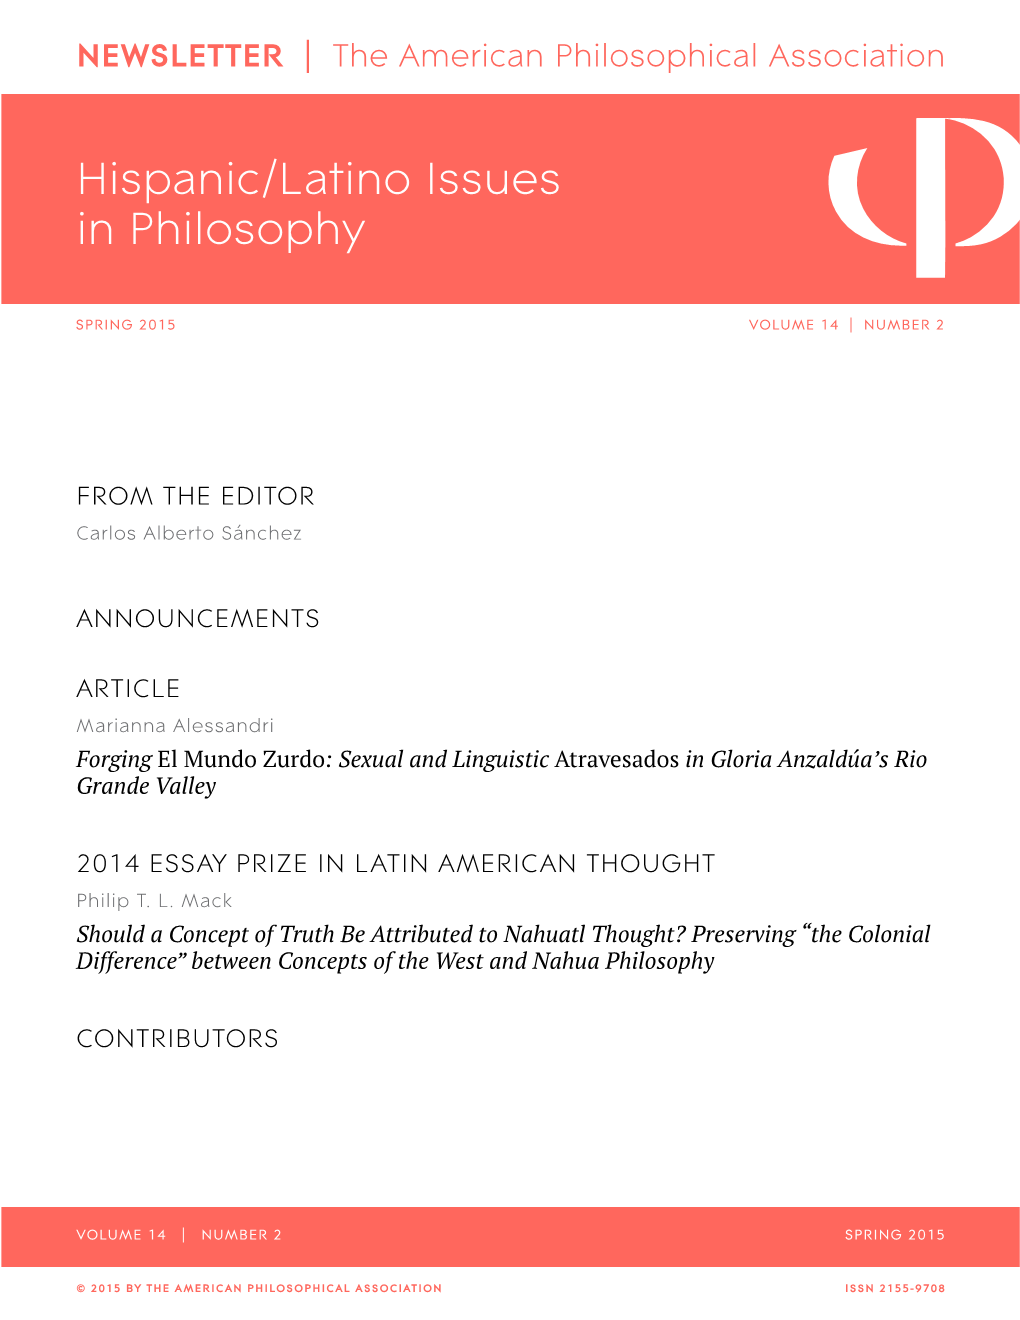 APA Newsletter on Hispanic/Latino Issues in Philosophy, Vol. 14, No. 2 (Spring 2015)